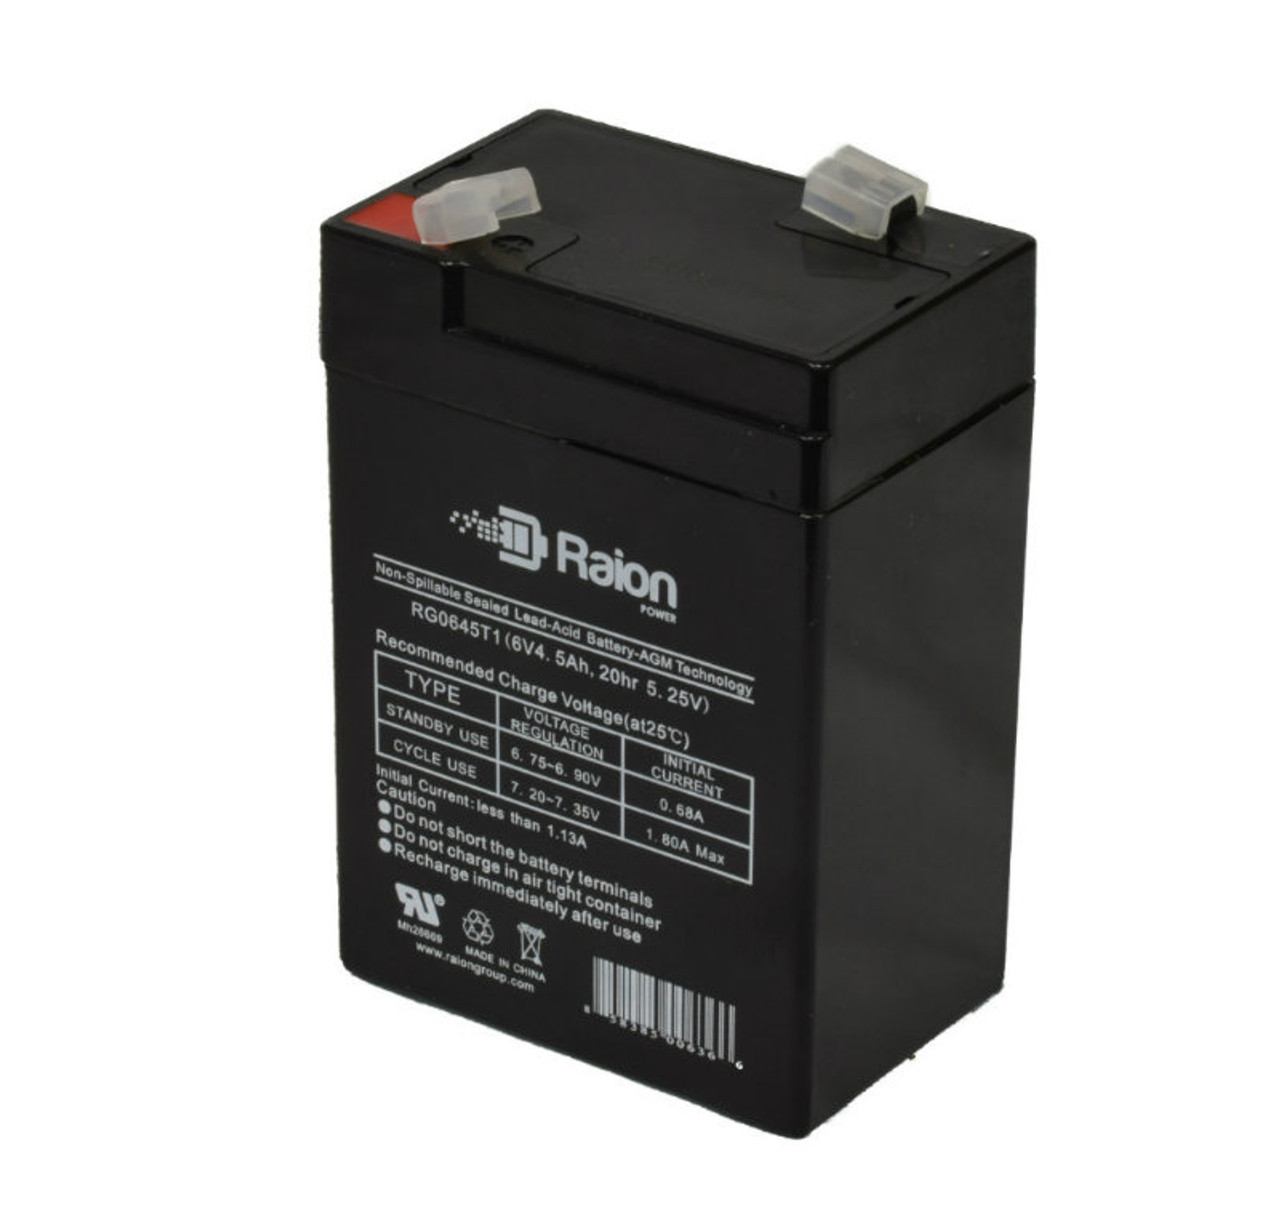 Raion Power RG0645T1 6V 4.5Ah Replacement Battery Cartridge for Kalee KL40030